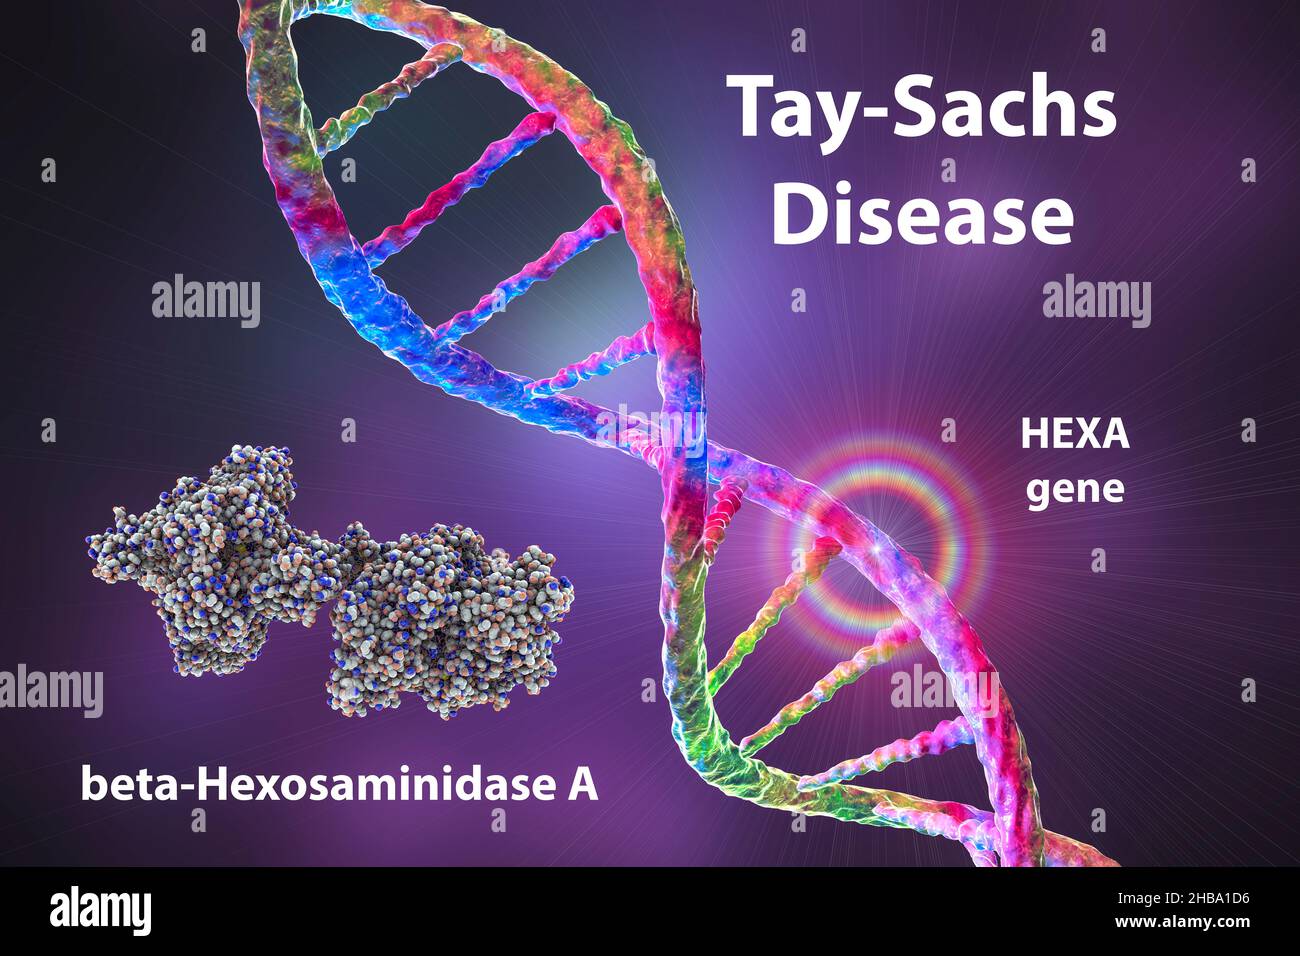 Tay-Sachs disease, illustration. A genetic disorder that progressively destroys brain neurons. It is caused by a mutation in the HEXA gene of chromosome 15 leading to deficiency of hexosaminidase A. Tay-sachs is most commonly seen in infants, manifesting in muscle weakness and decreased motor function, vision and hearing loss, and intellectual disability. Stock Photo